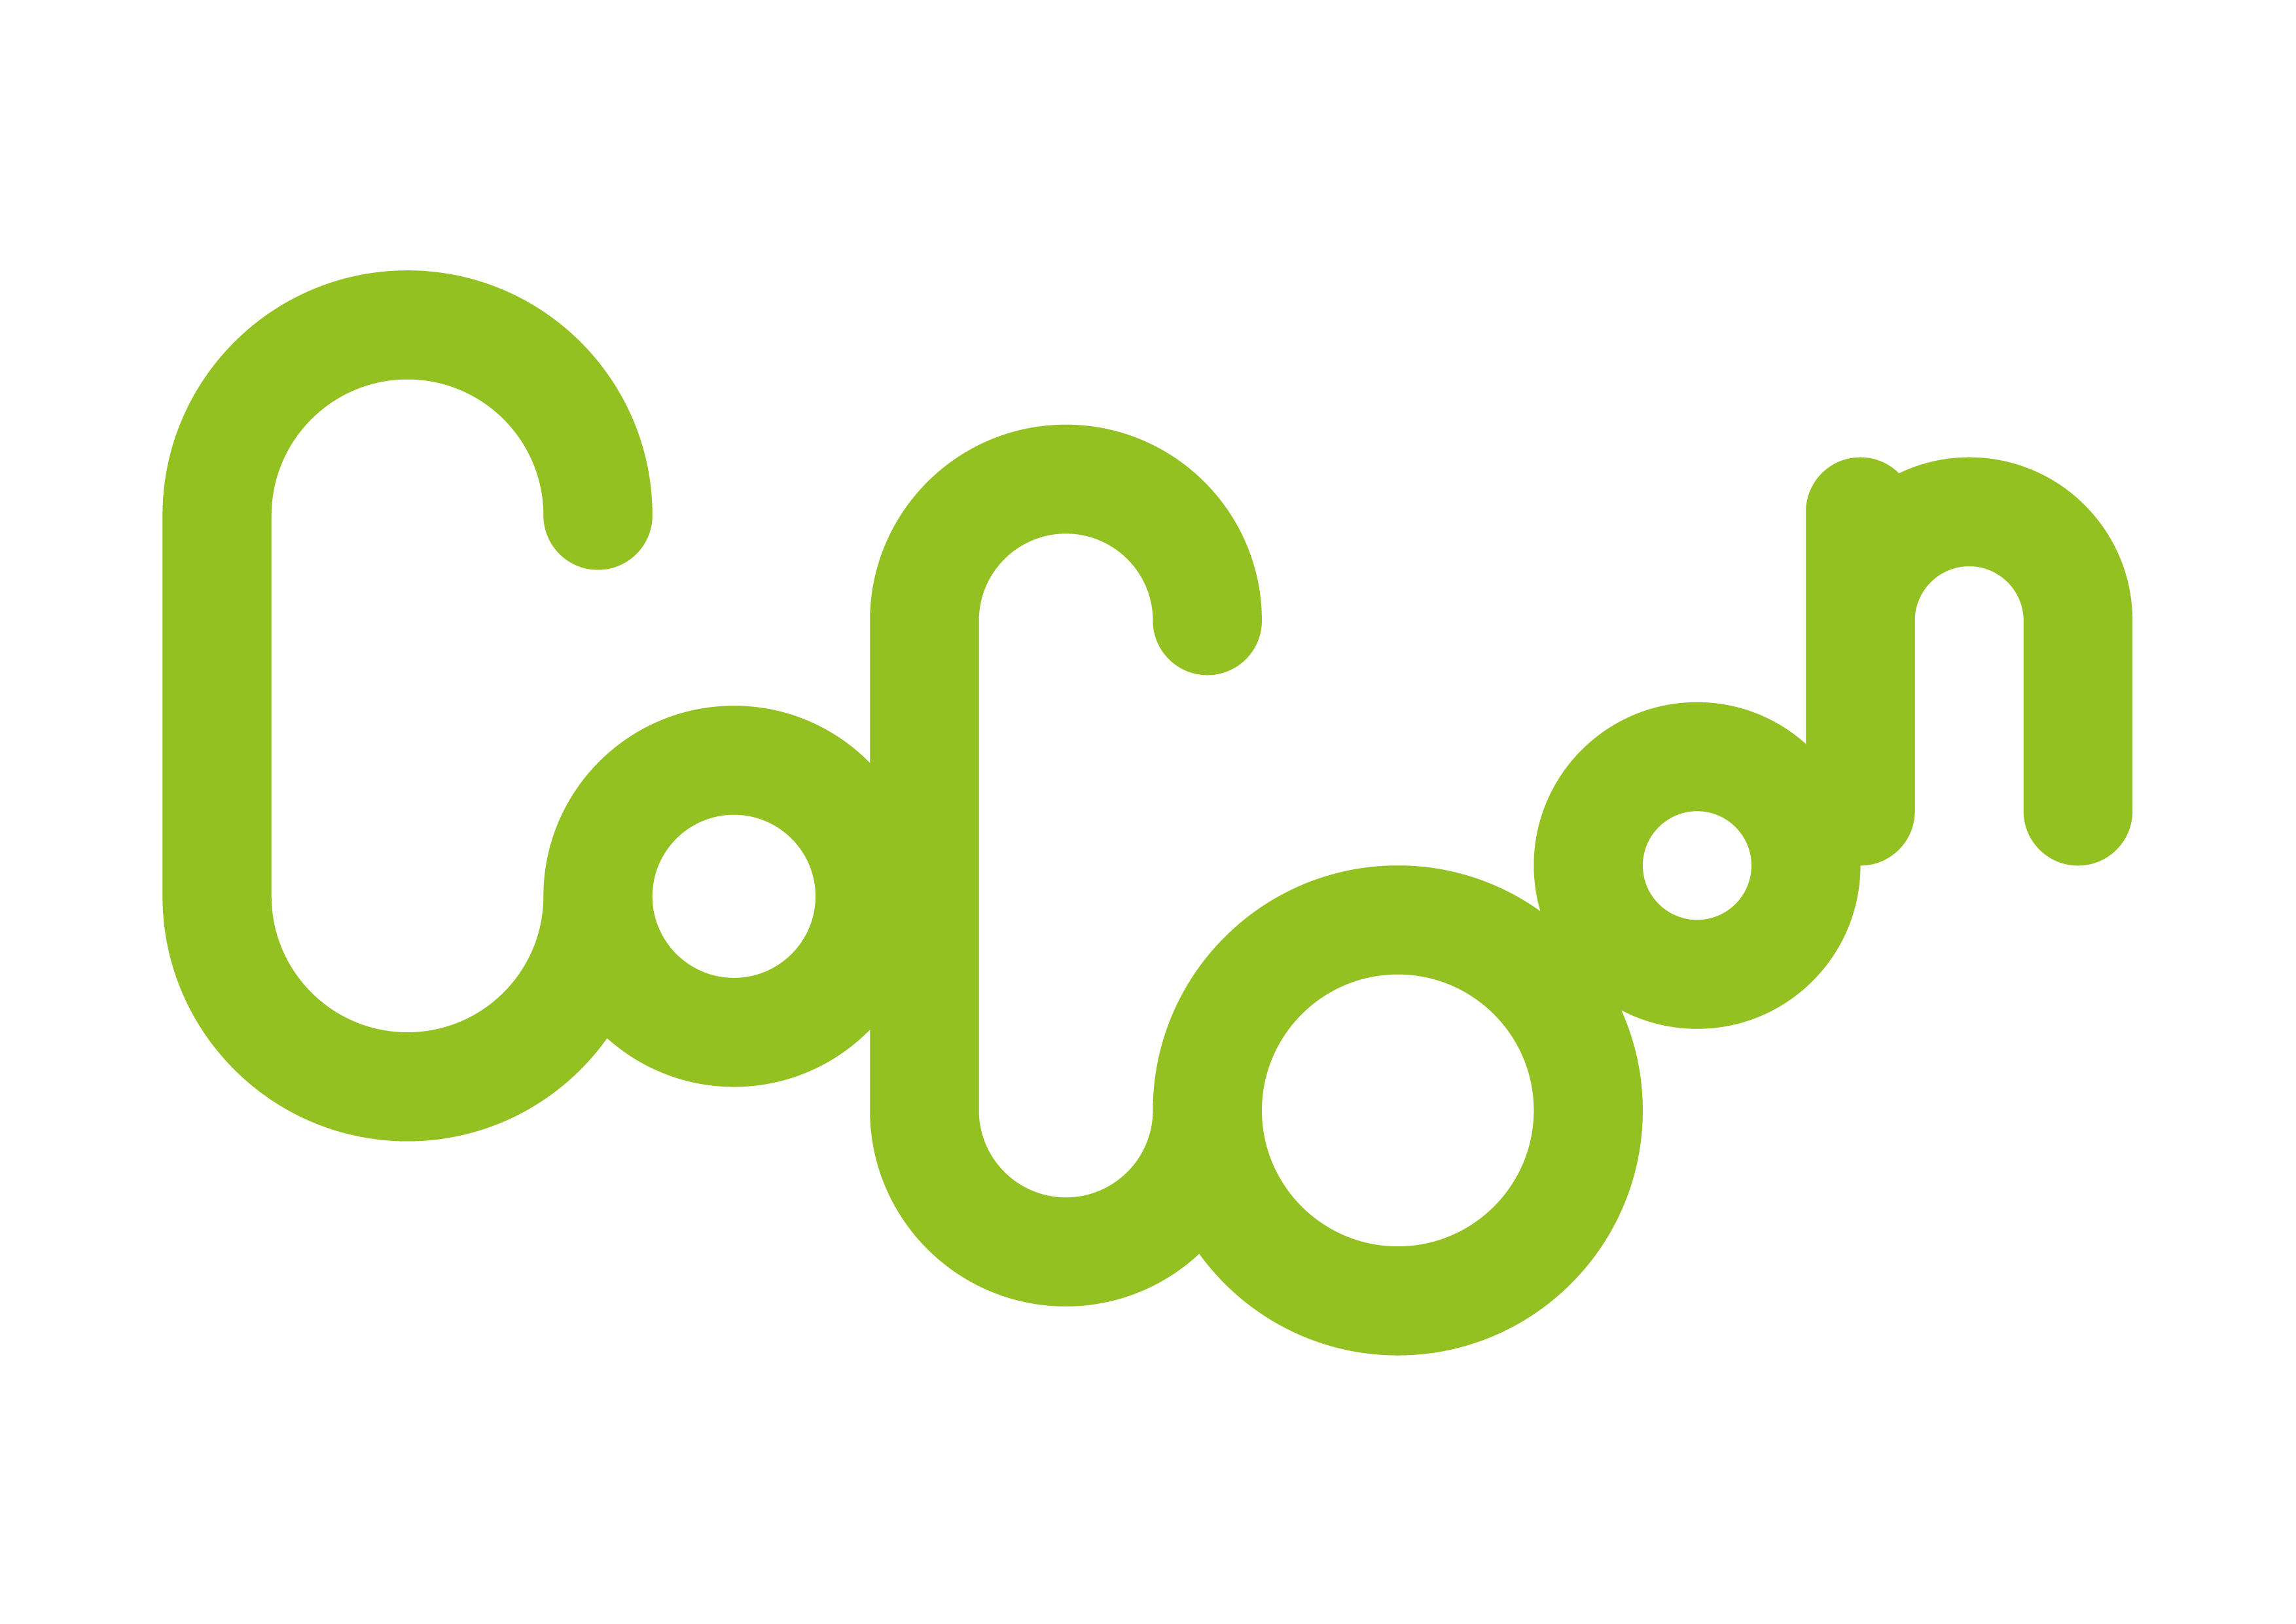 Logo of Cocoon